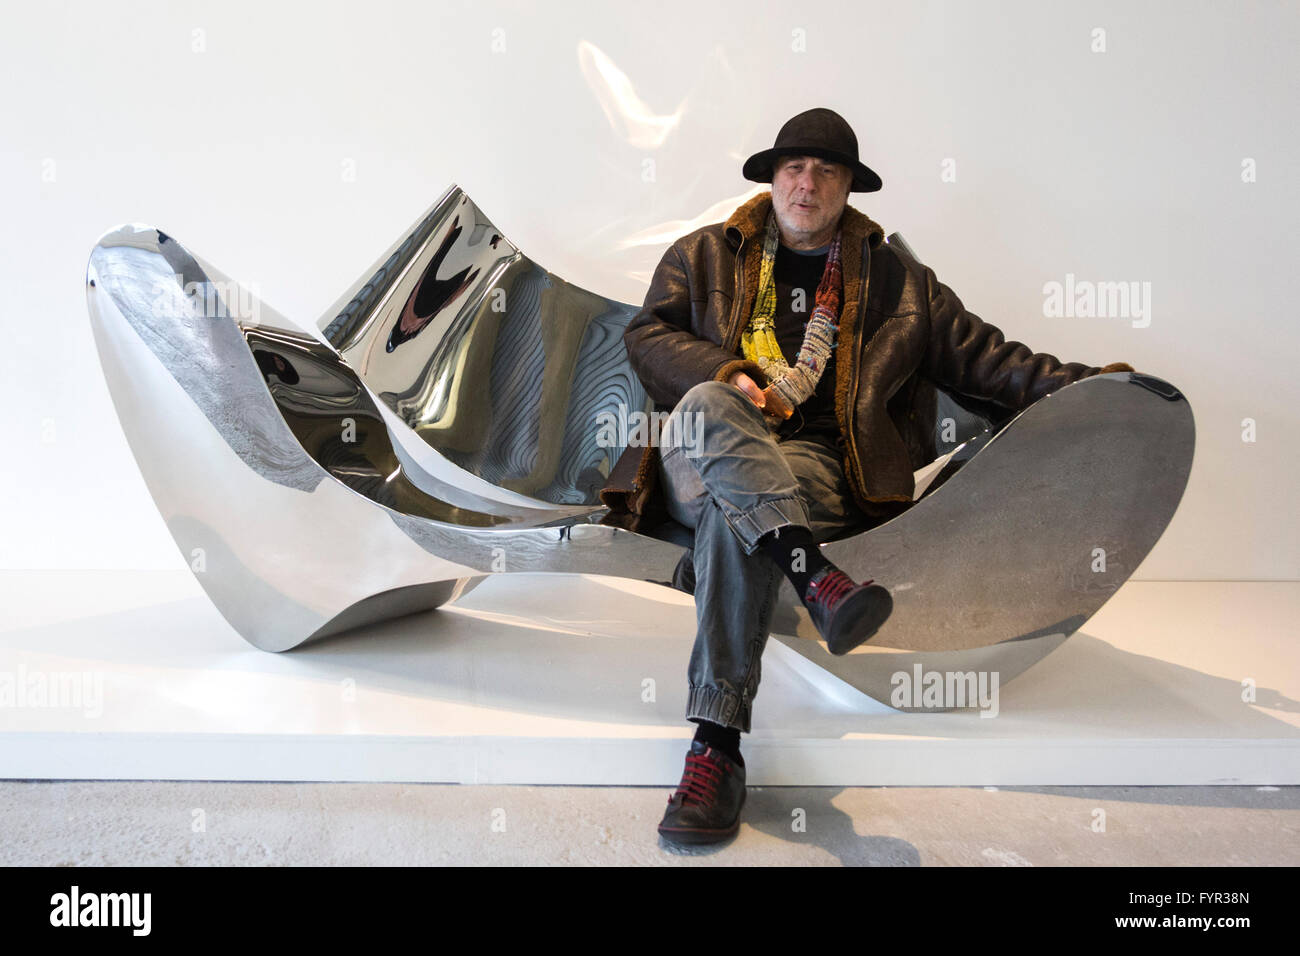 London, UK. 27 April 2016. Designer Ron Arad sits on the polished stainless  steel D-Sofa, 1994, which he designed. Donated for the auction by Johannes  and Helene Huth. Est. GBP 100,000-150,000. The